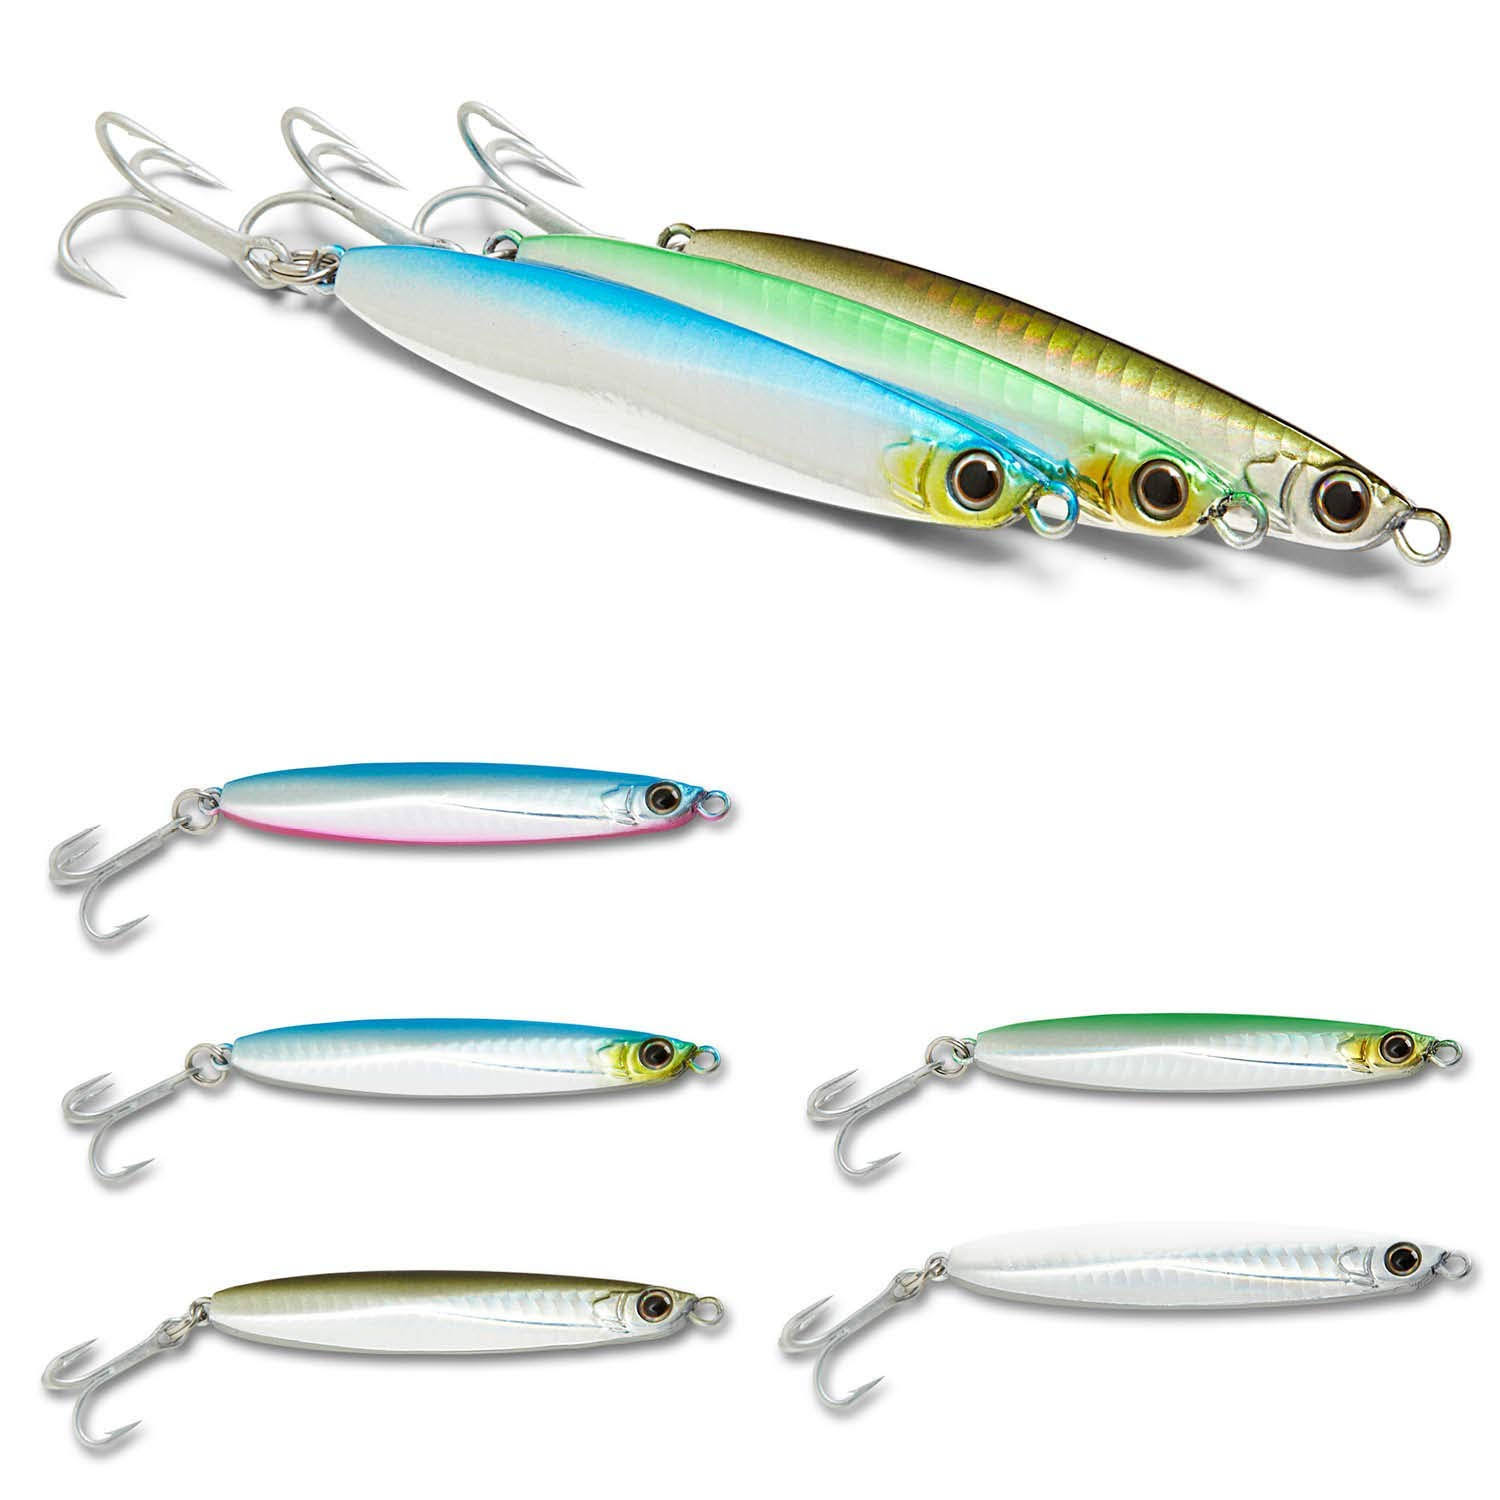 Shimano Coltsniper Jig Slow Fall Lure | Boating & Fishing | Delivery Guaranteed | 30 Day Money Back Guarantee | Free Shipping On All Orders